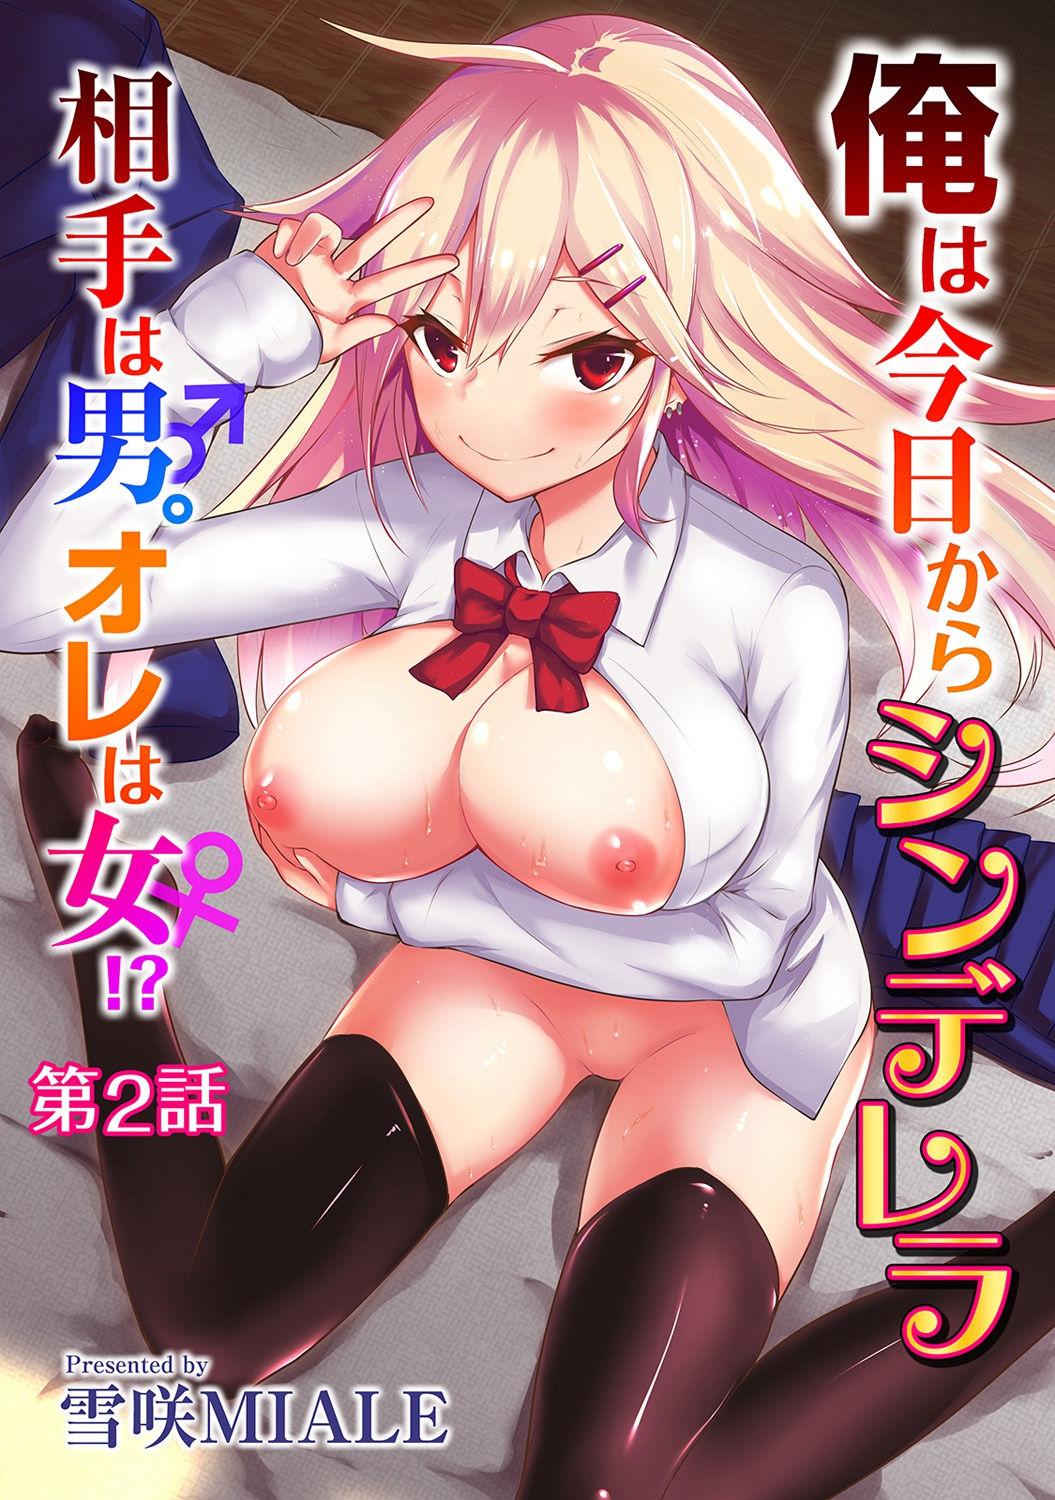 Gayfuck Ore wa Kyou kara Cinderella Aite wa Otoko. Ore wa Onna!? | From now on, I’m Cinderella. My Partner is a Man and I’m a Woman!? Ch. 2 Groupsex - Picture 1